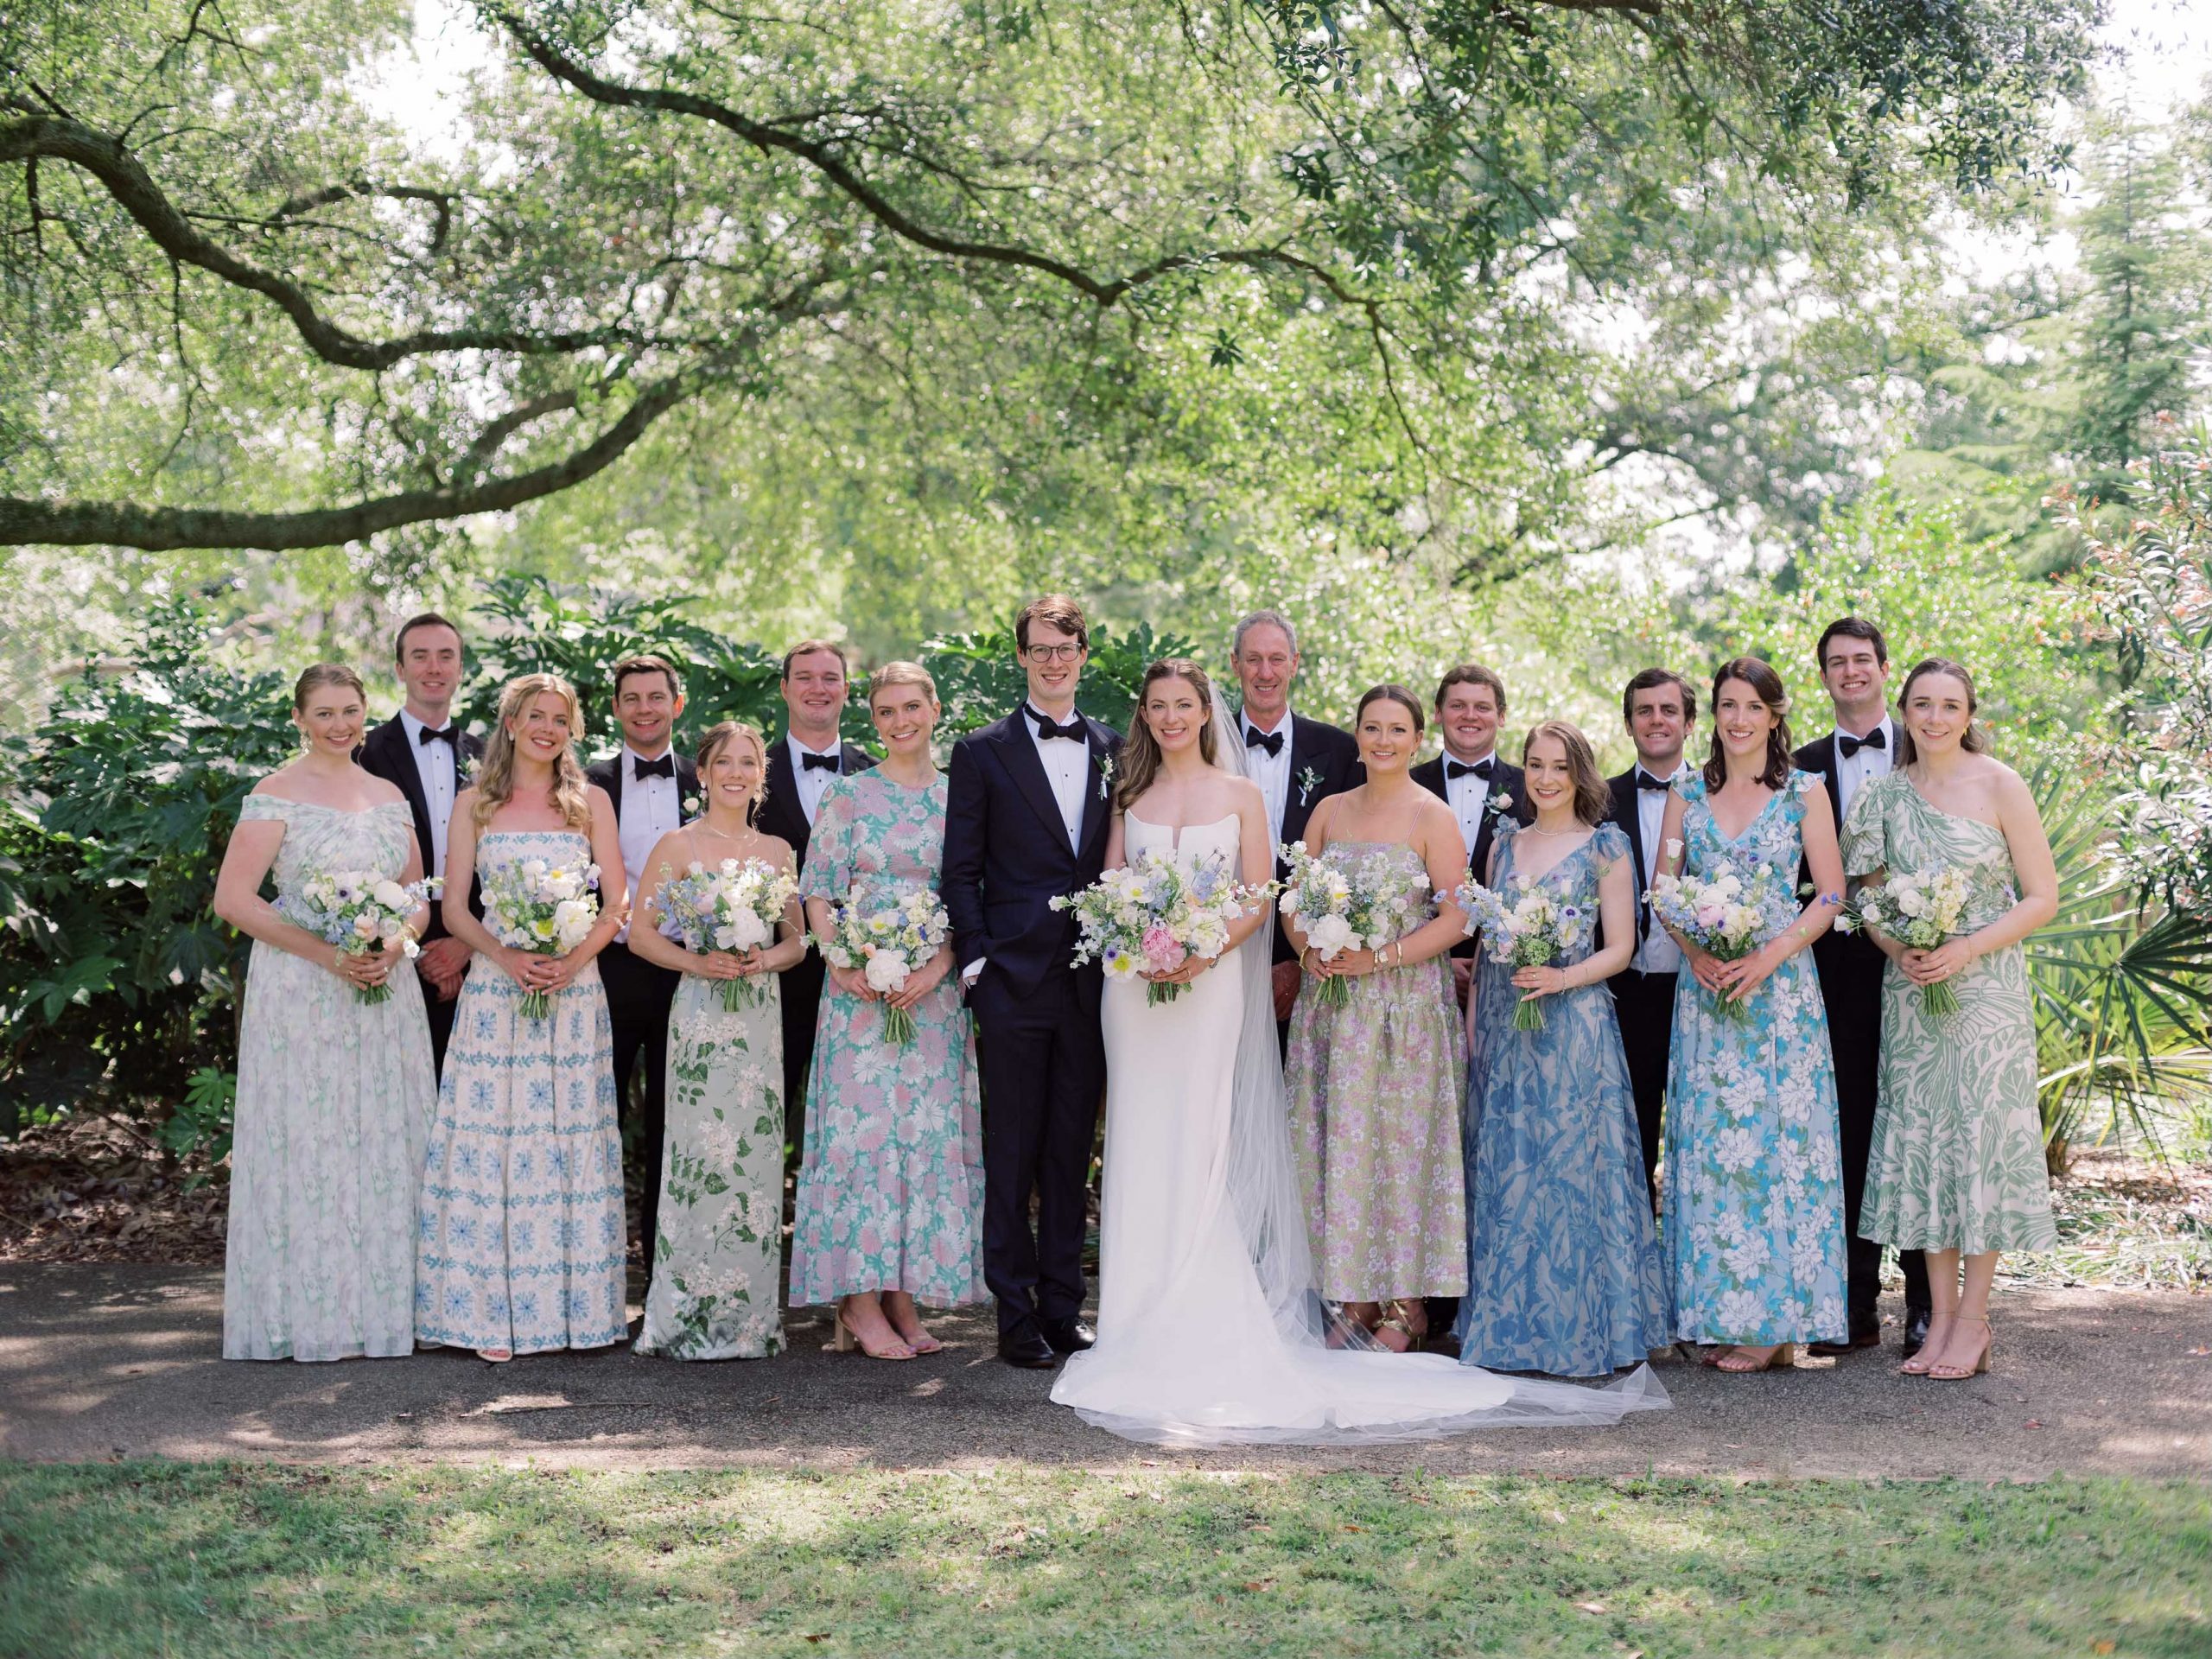 Green and blue were the colors of the day. Sarah Jackson asked her eight bridesmaids to select their own dresses, something floral in those colors, that they felt happy wearing. Lauren Pansegrau, Andrew Schultz, Louisa Lawton, Alex Cooley, Mary Sims Hershey, Matthew Johnson, Alex Deitz, Kubi Johnson, Sarah Jackson Smith, Douglas Johnson, Emma Whittemore, Hamilton Merrill, Augusta Bauknight, Jimbo Barnes, Danielle Zurcher, Oliver Smith, Clare Cancelliere. 